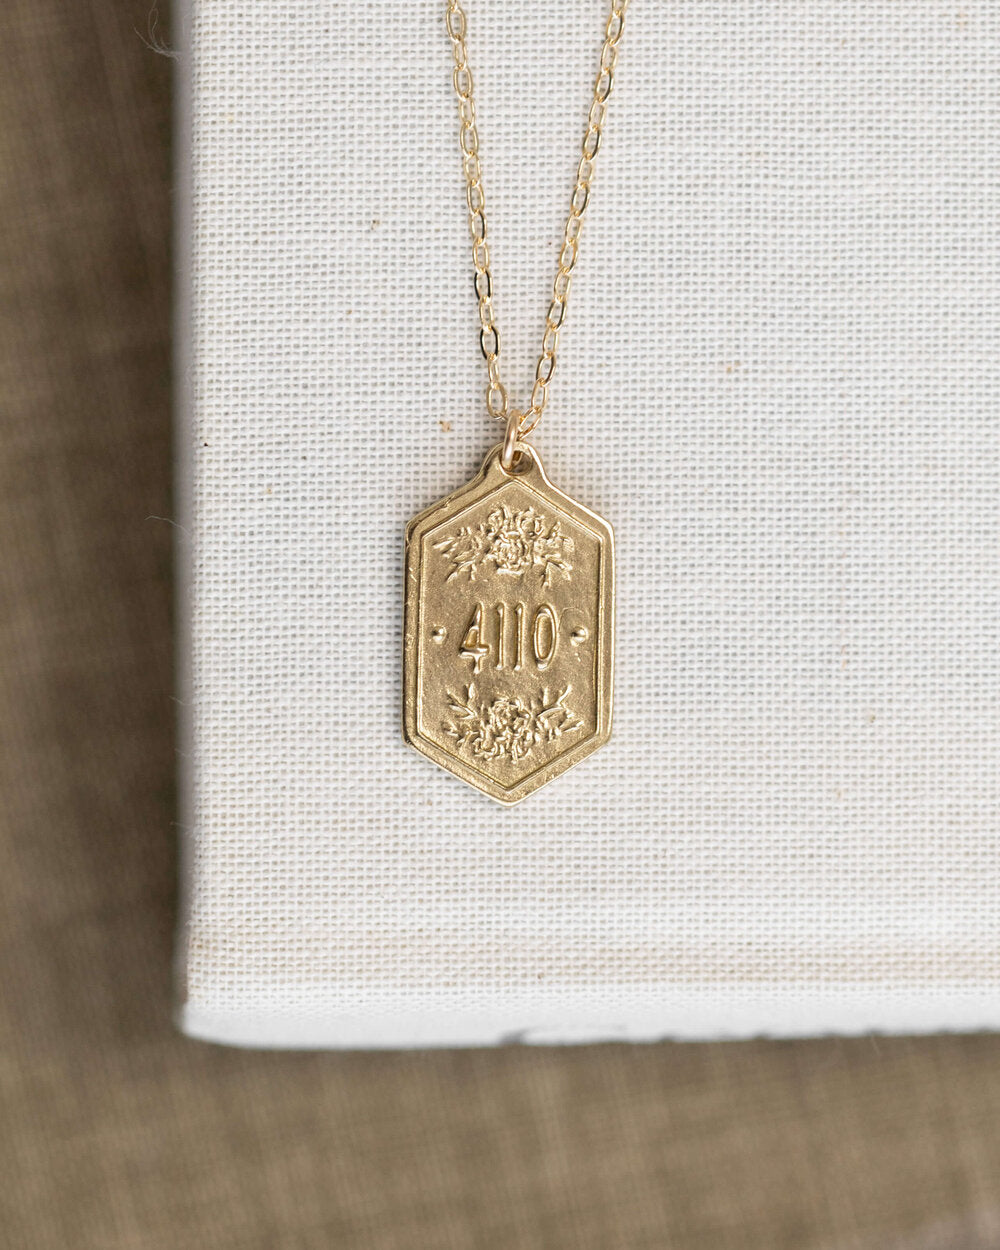 Isaiah 41:10 Necklace